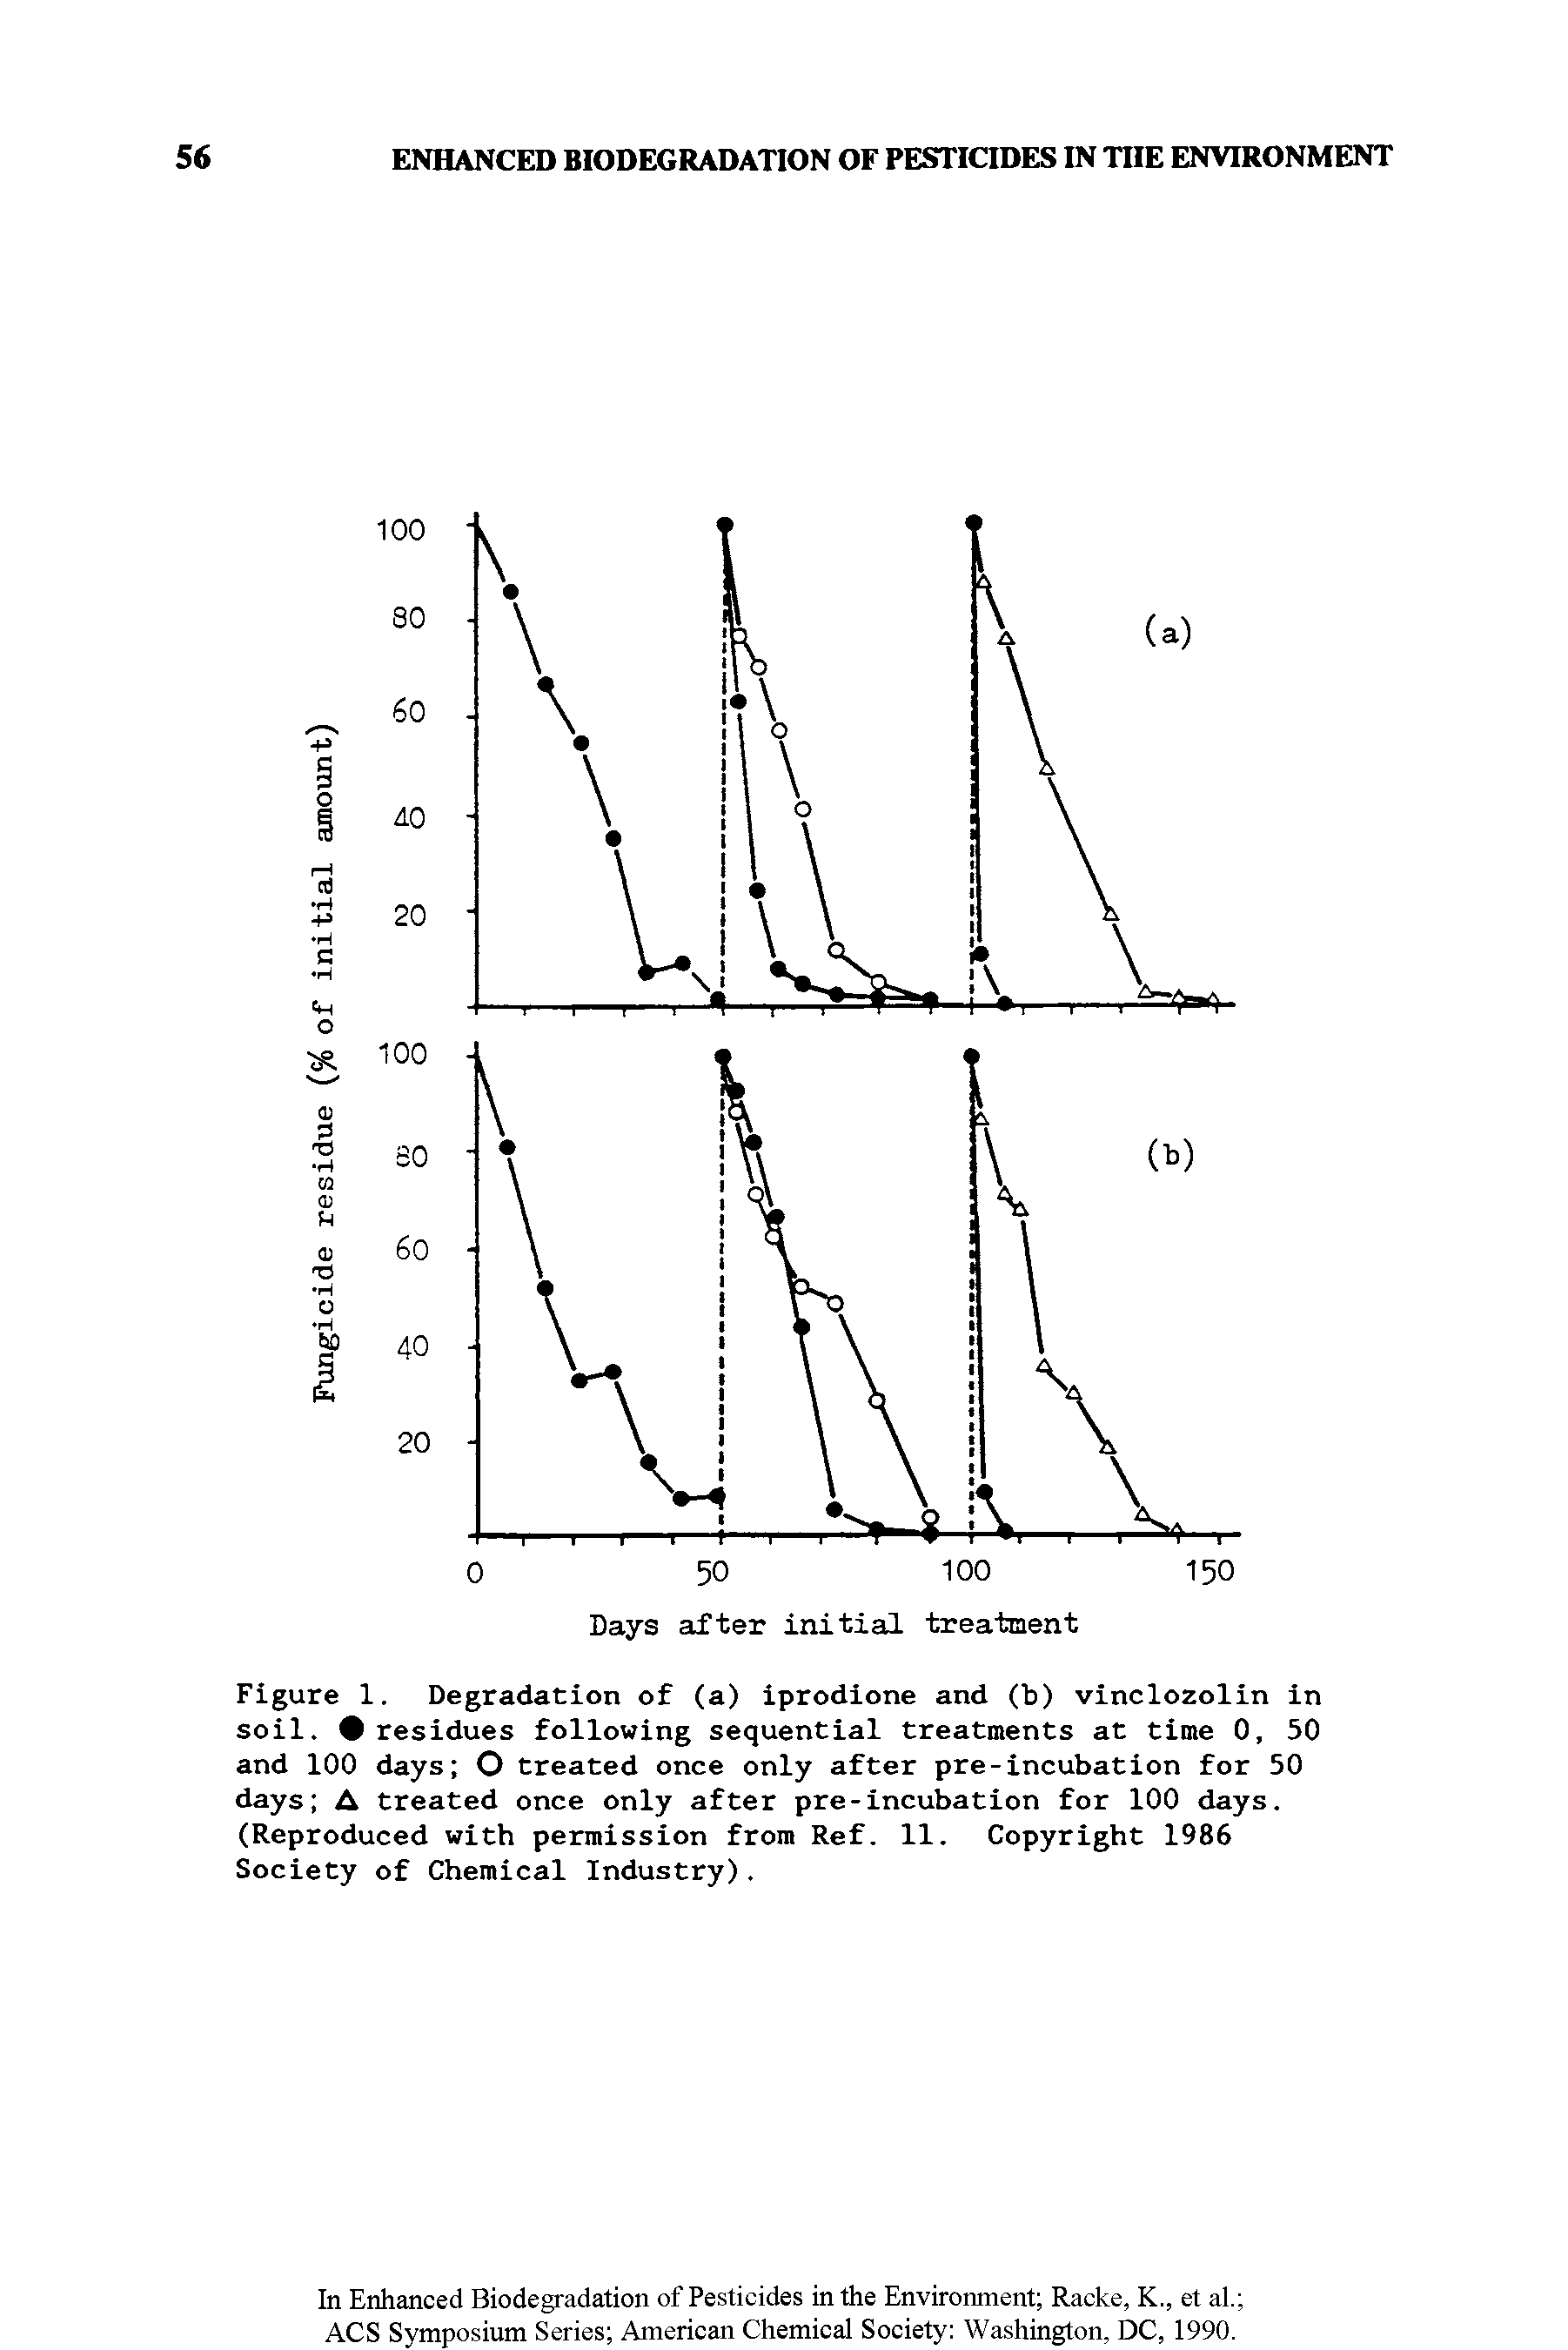 Figure 1. Degradation of (a) iprodione and (b) vinclozolin in soil, t residues following sequential treatments at time 0, 50 and 100 days O treated once only after pre-incubation for 50 days A treated once only after pre-incubation for 100 days. (Reproduced with permission from Ref. 11. Copyright 1986 Society of Chemical Industry).